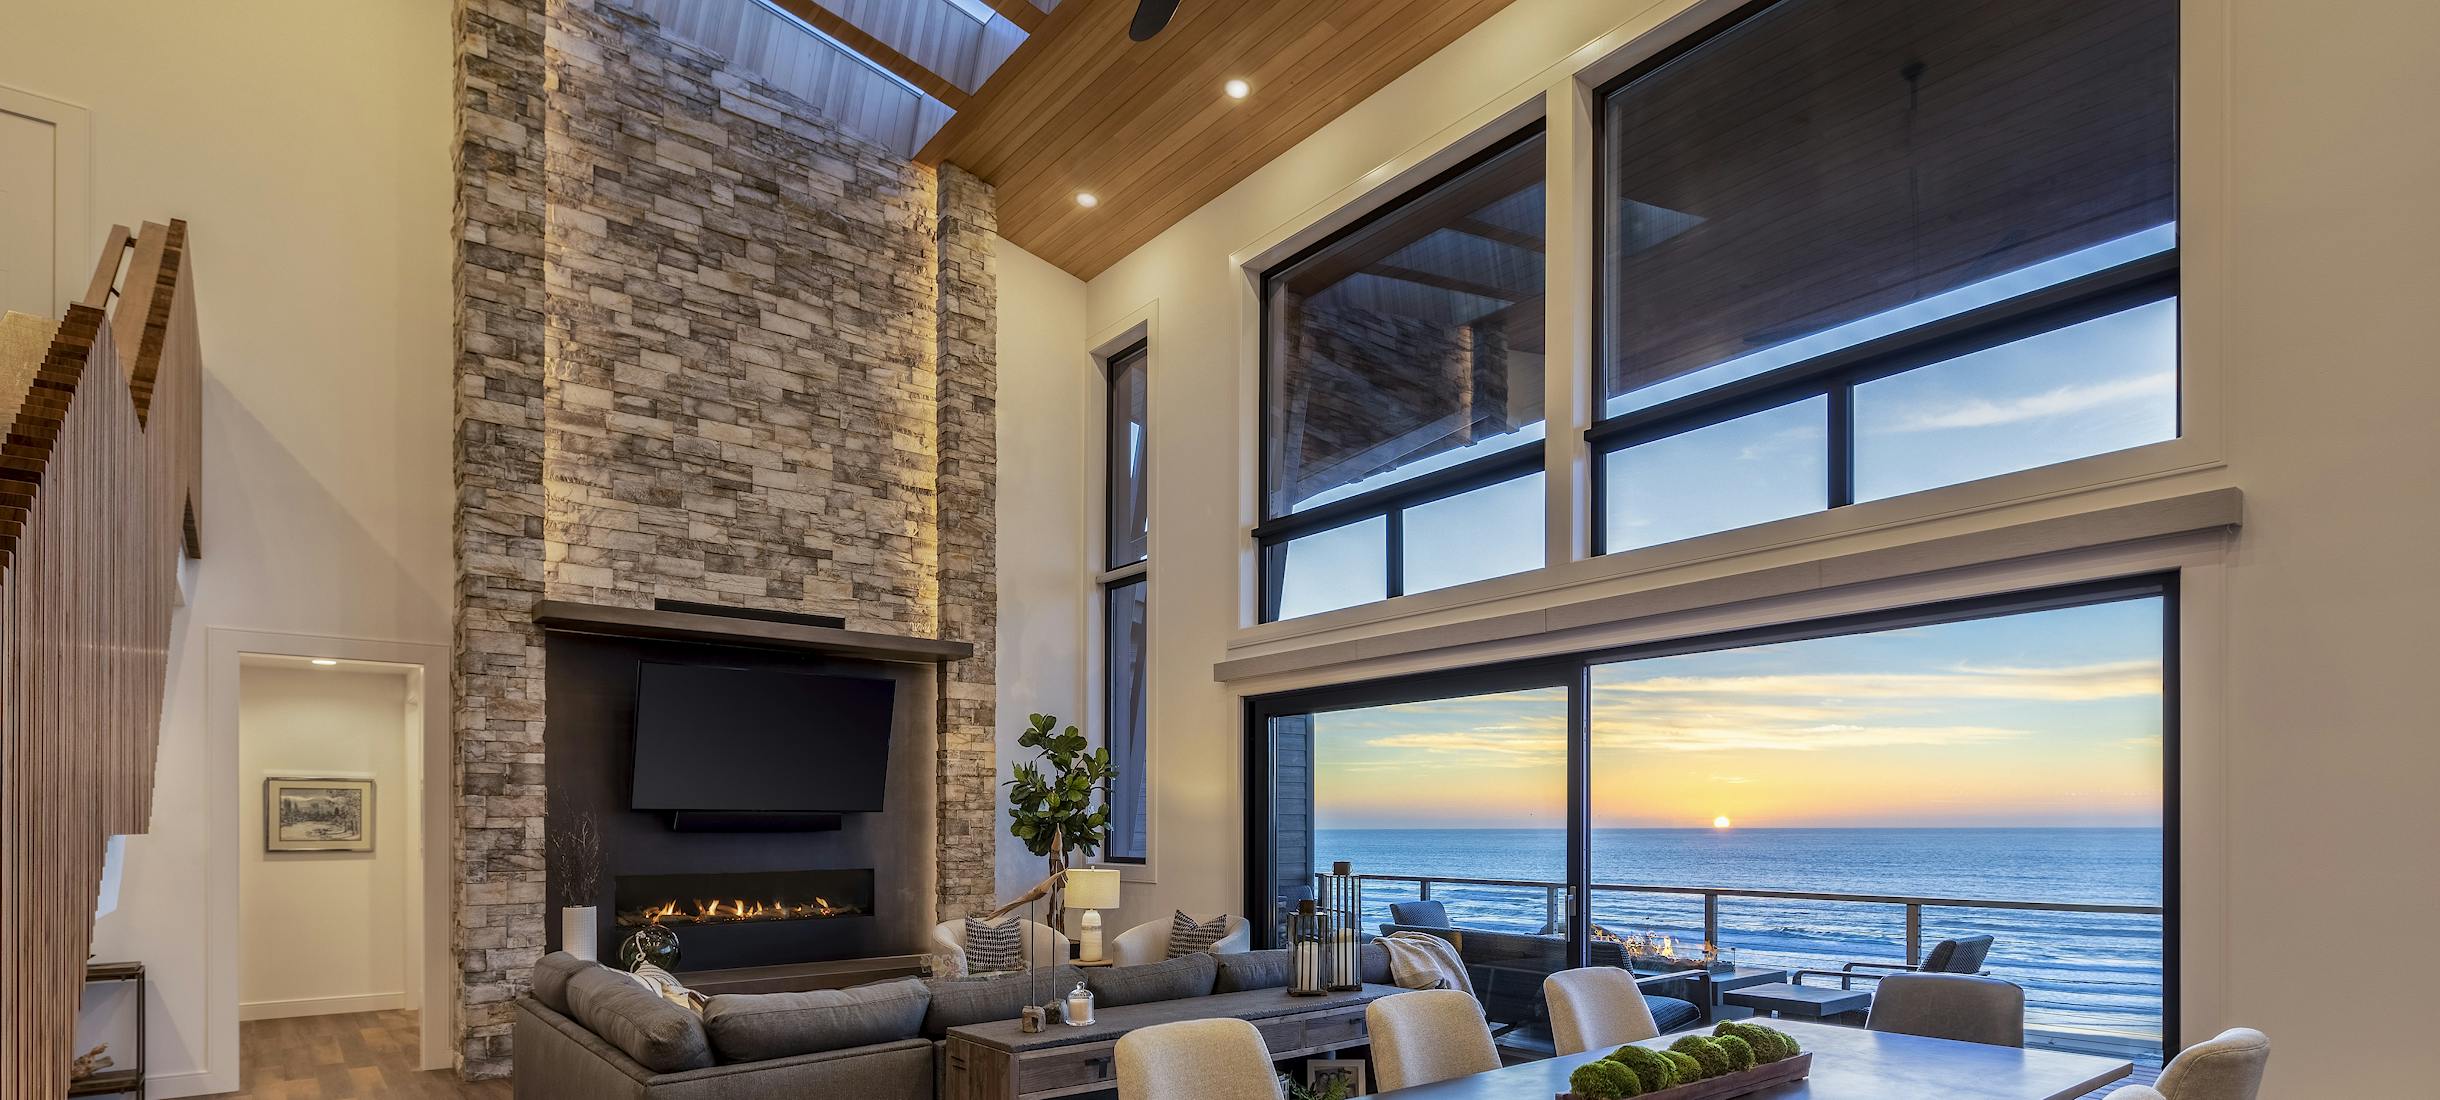 Create a Magical Fireplace with Stone Veneer